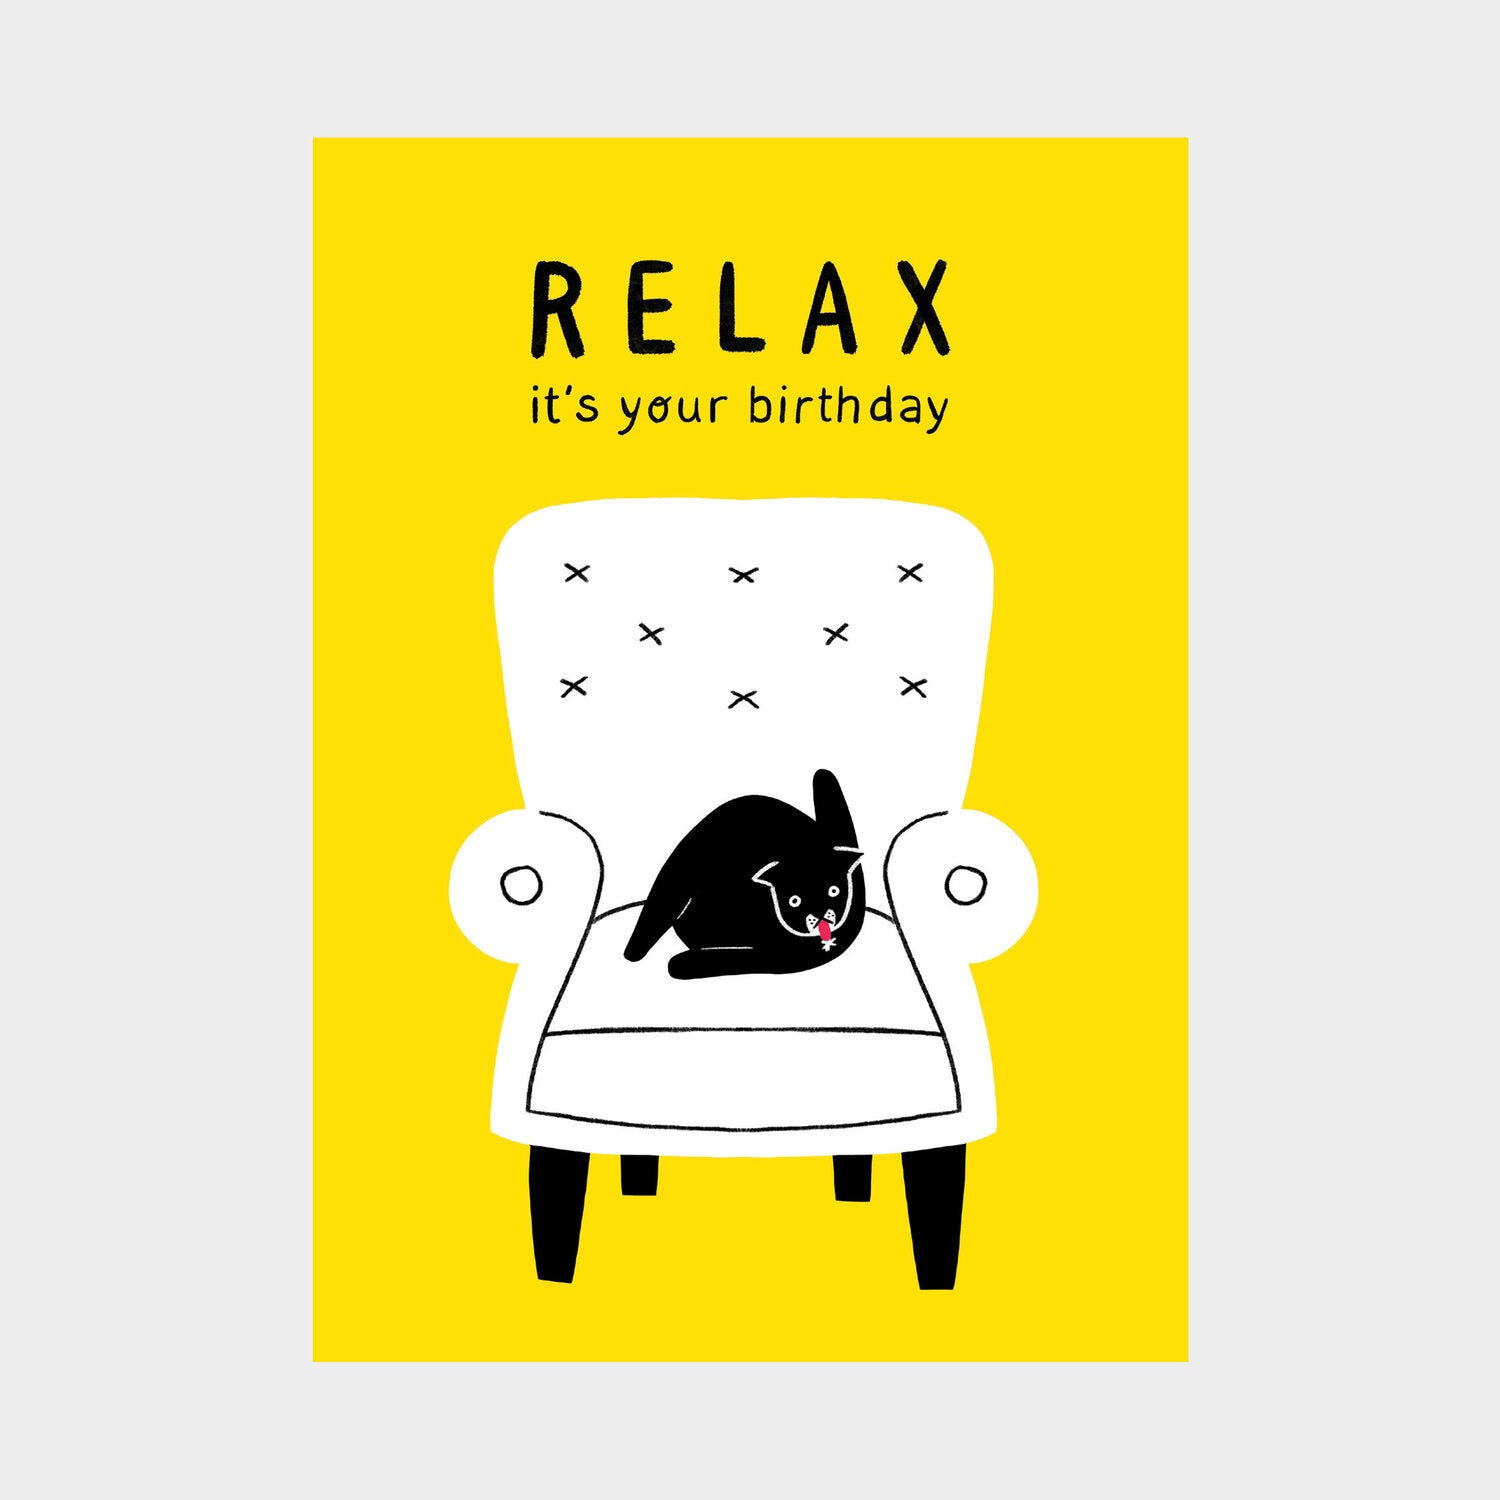 Relax it's your birthday card - Inspired 